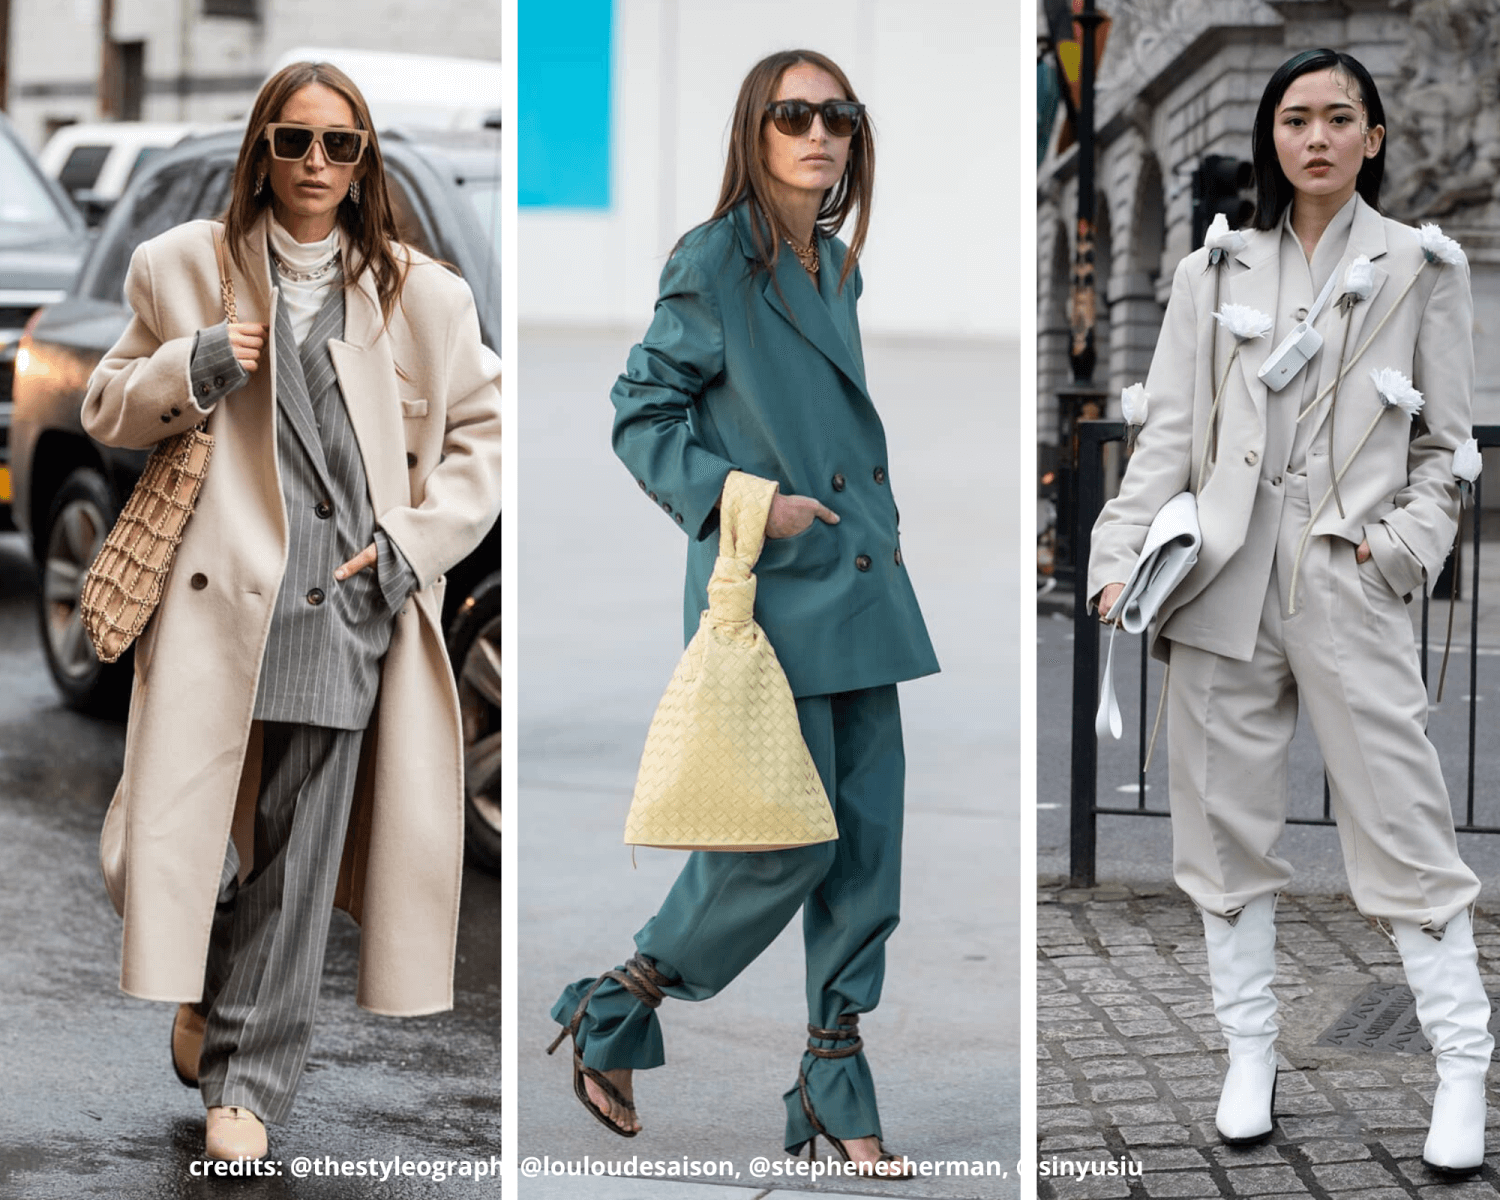 AW20 LFW street style fashion trends suit